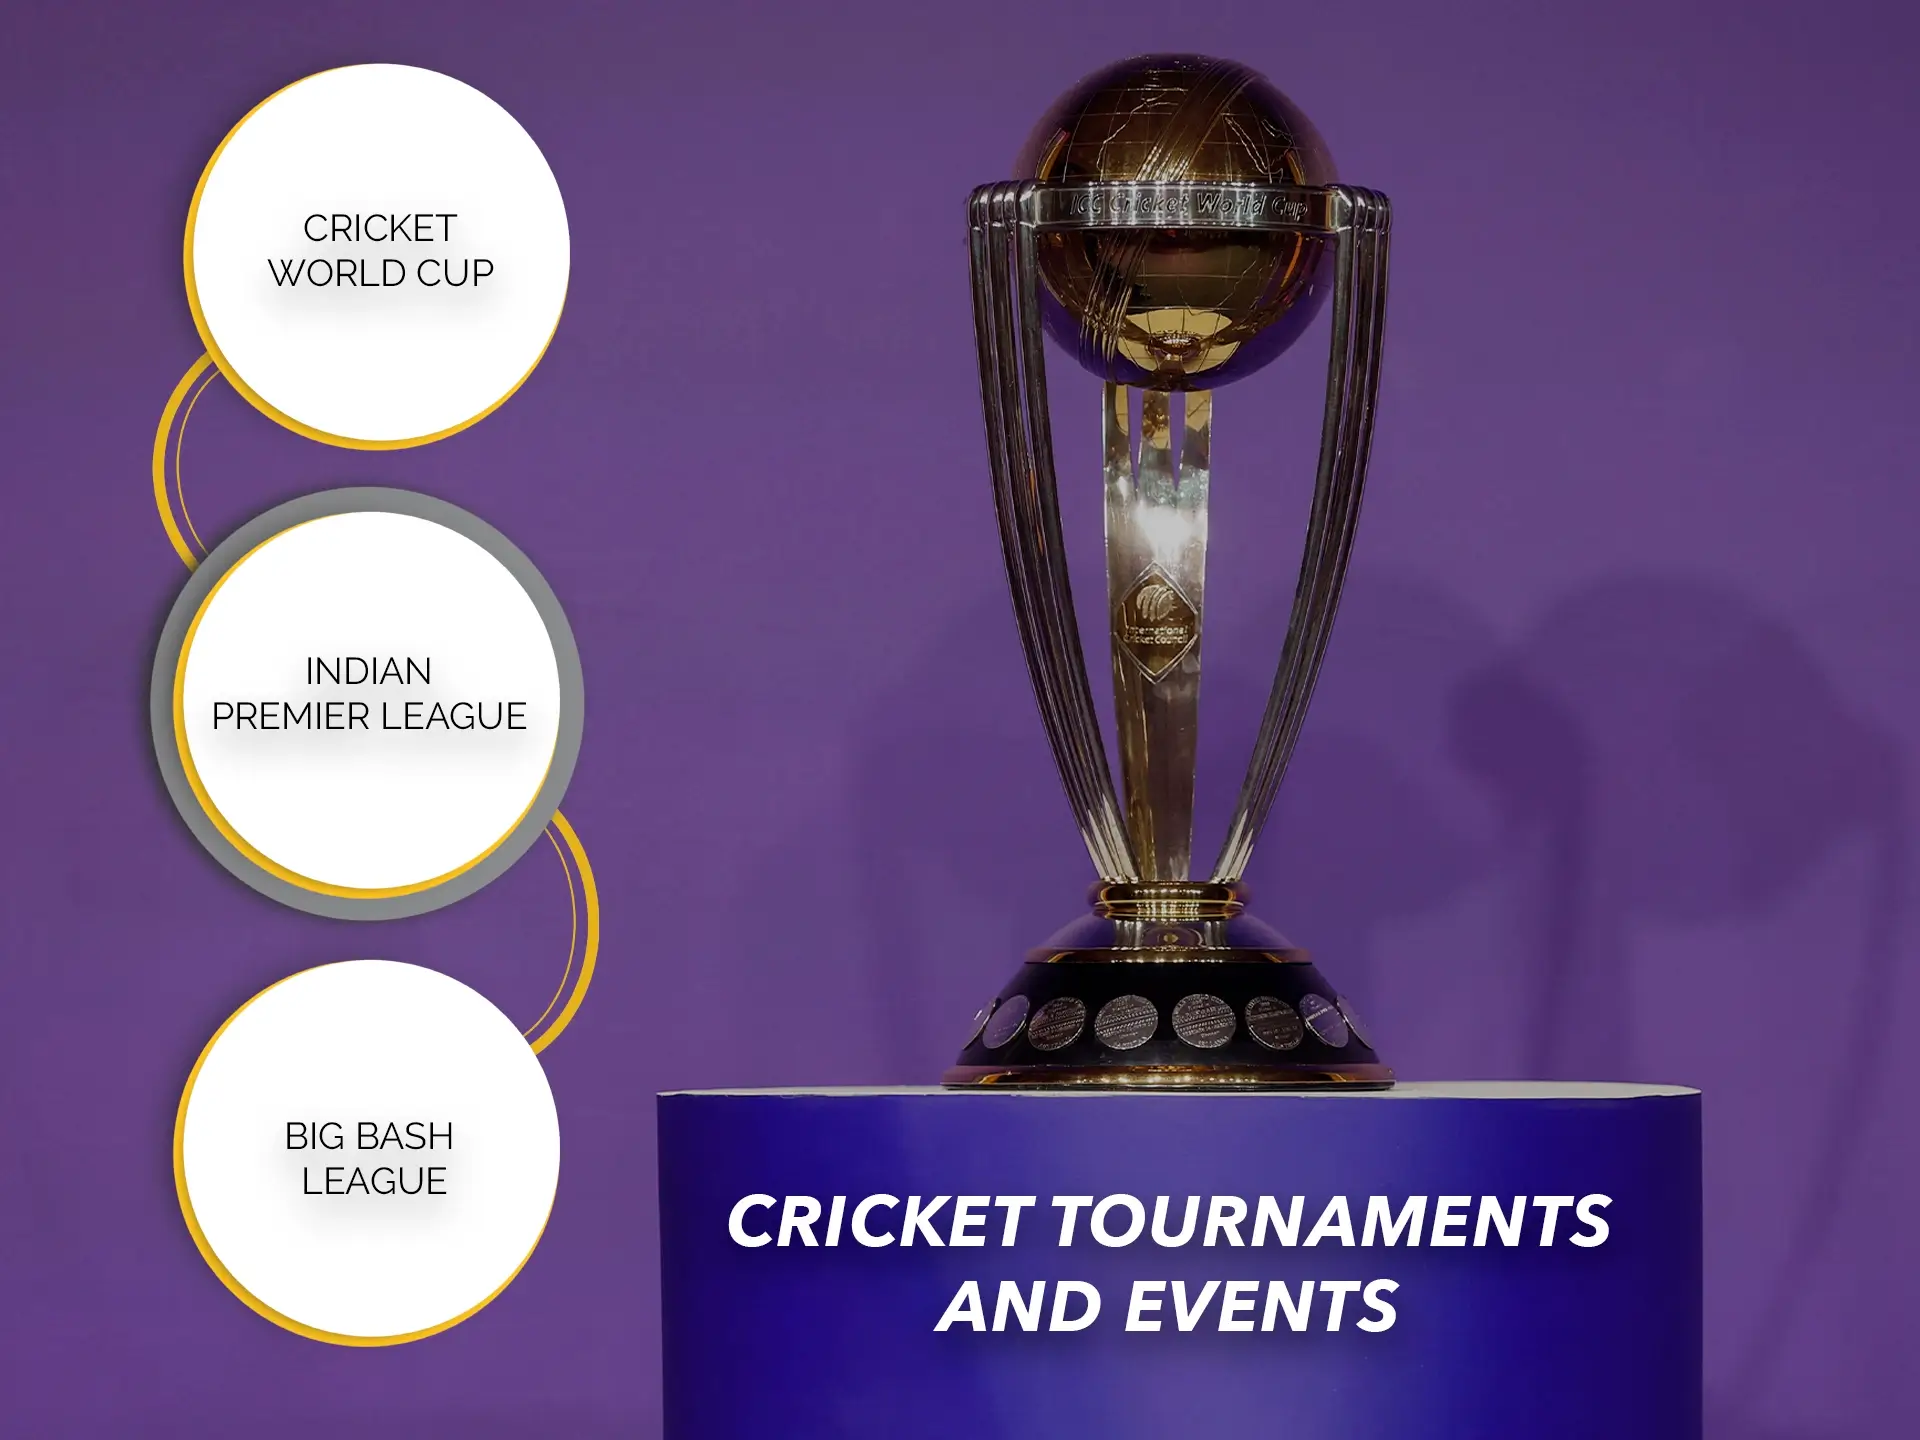 Cricket is many popular tournaments and events that can help you make money when betting.